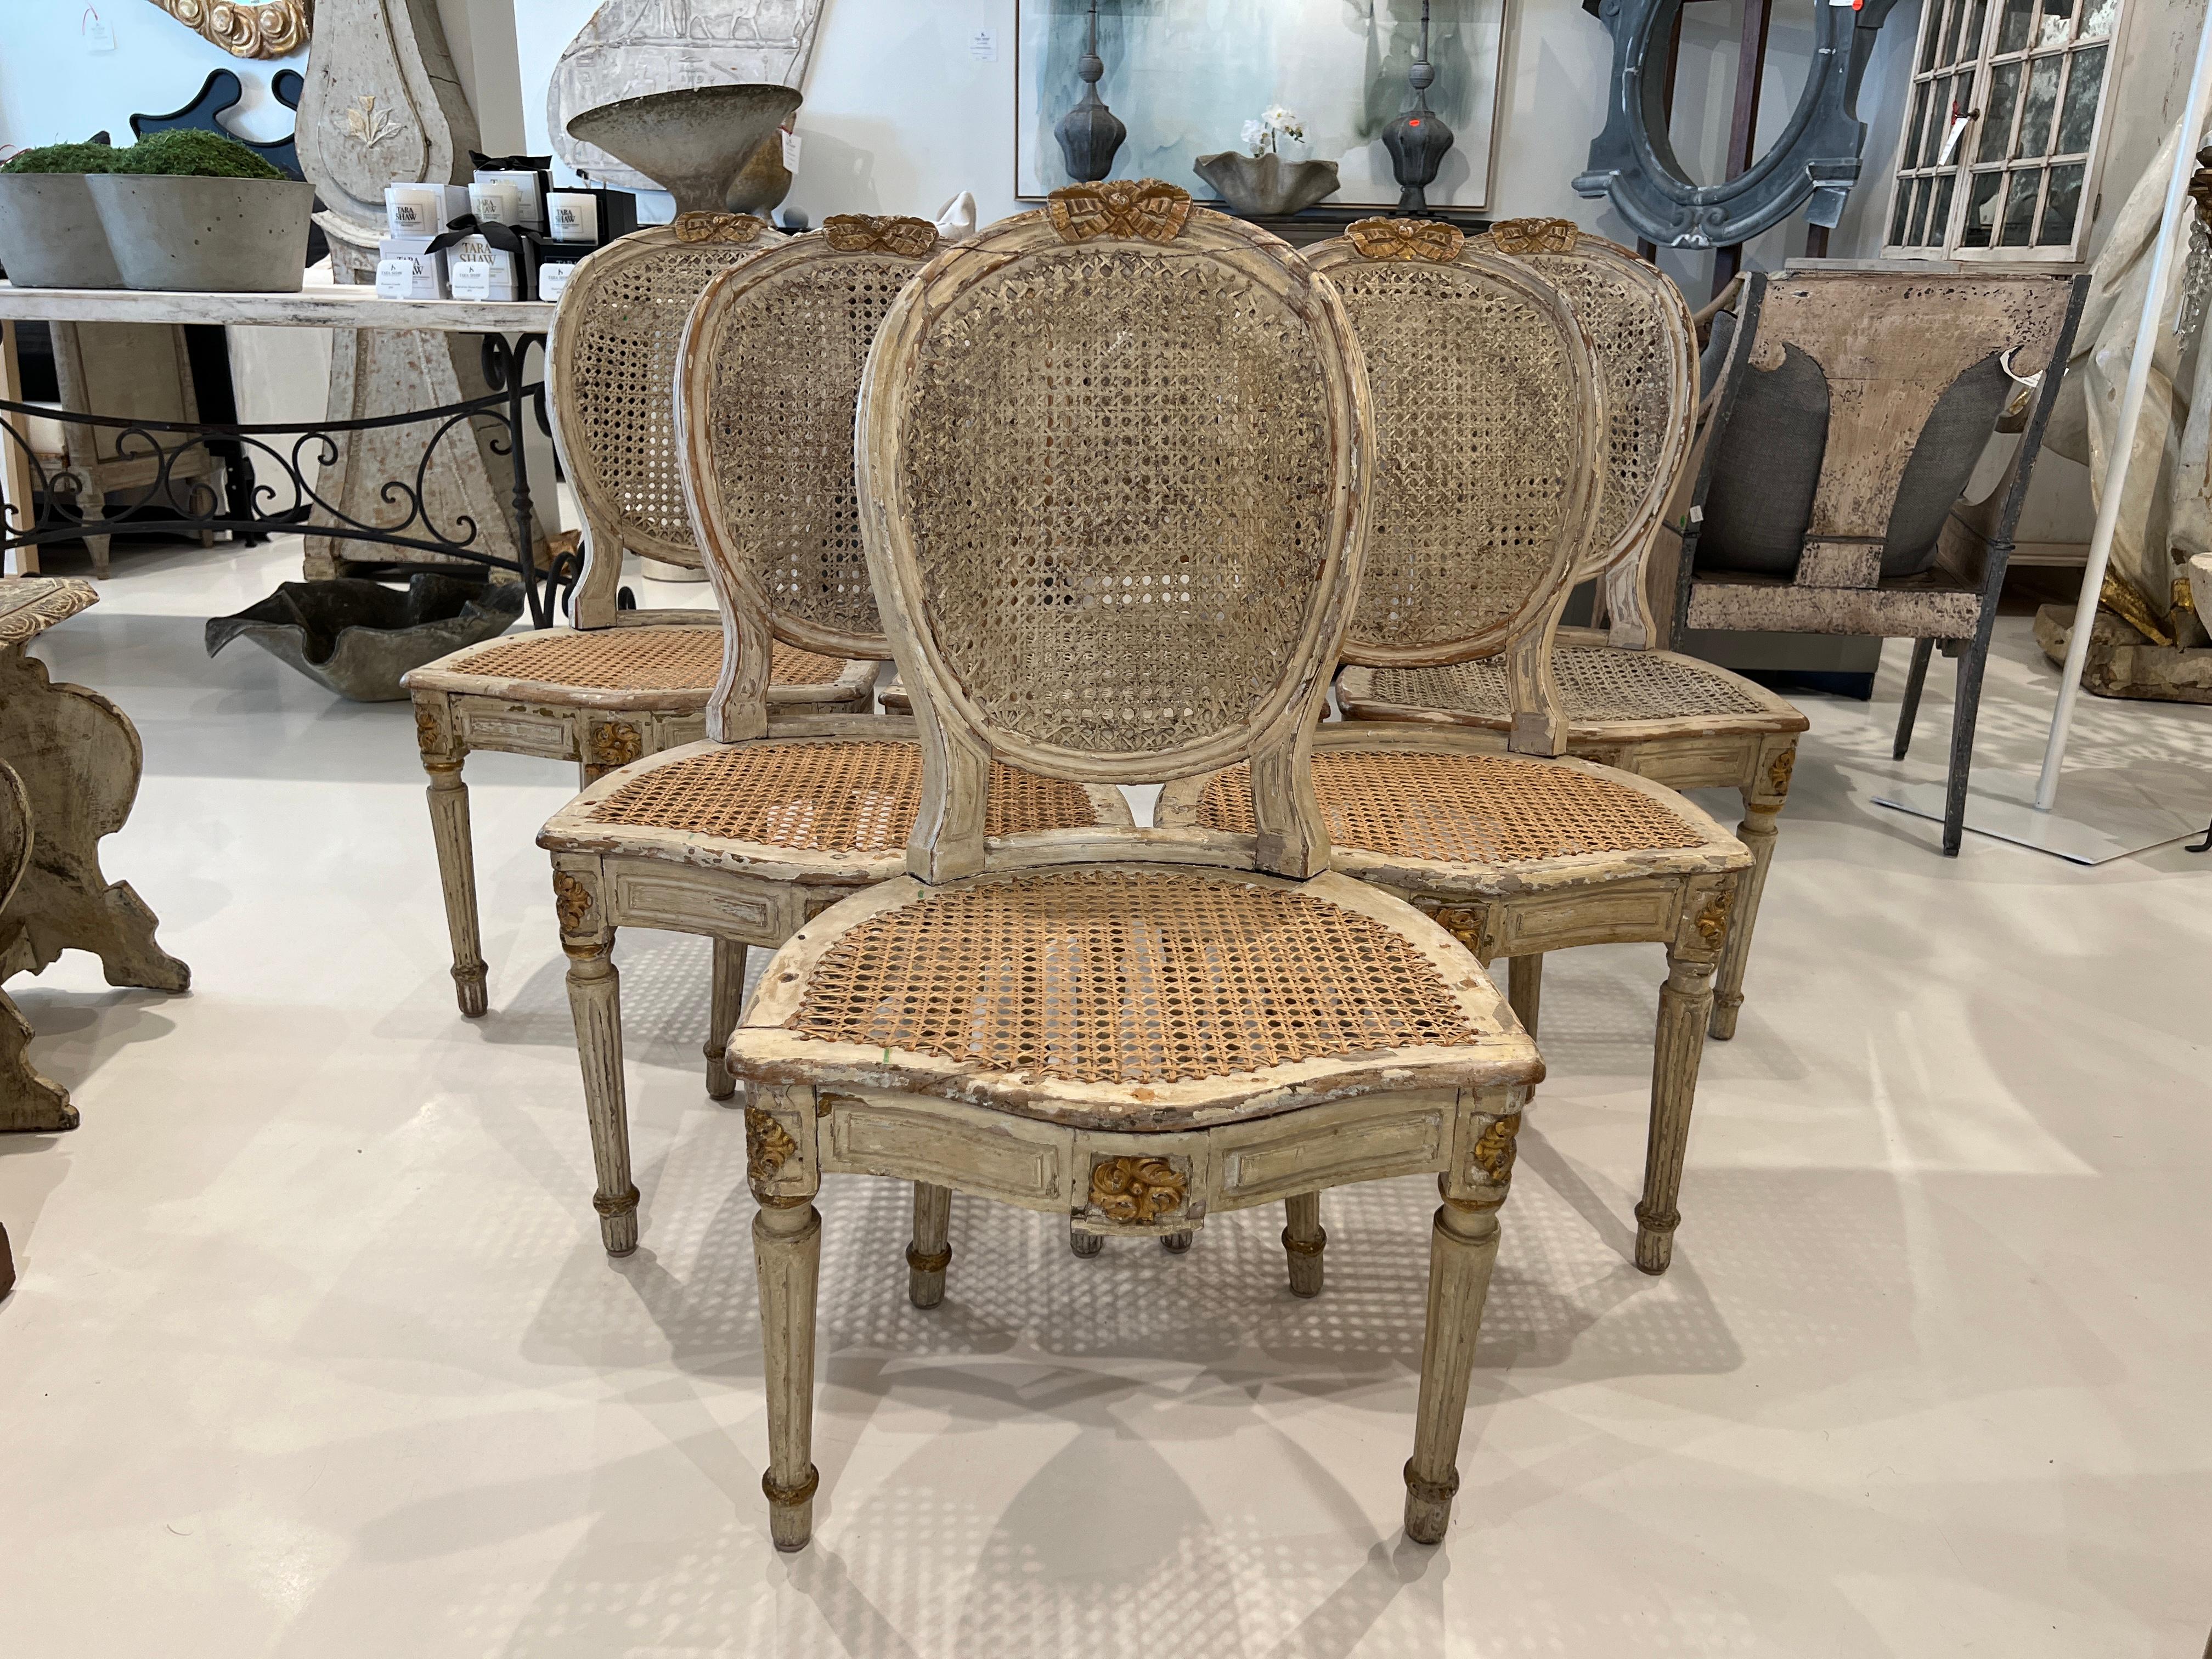 Set of 6 matching side chairs in carved and painted wood with caning on the backs and seats.